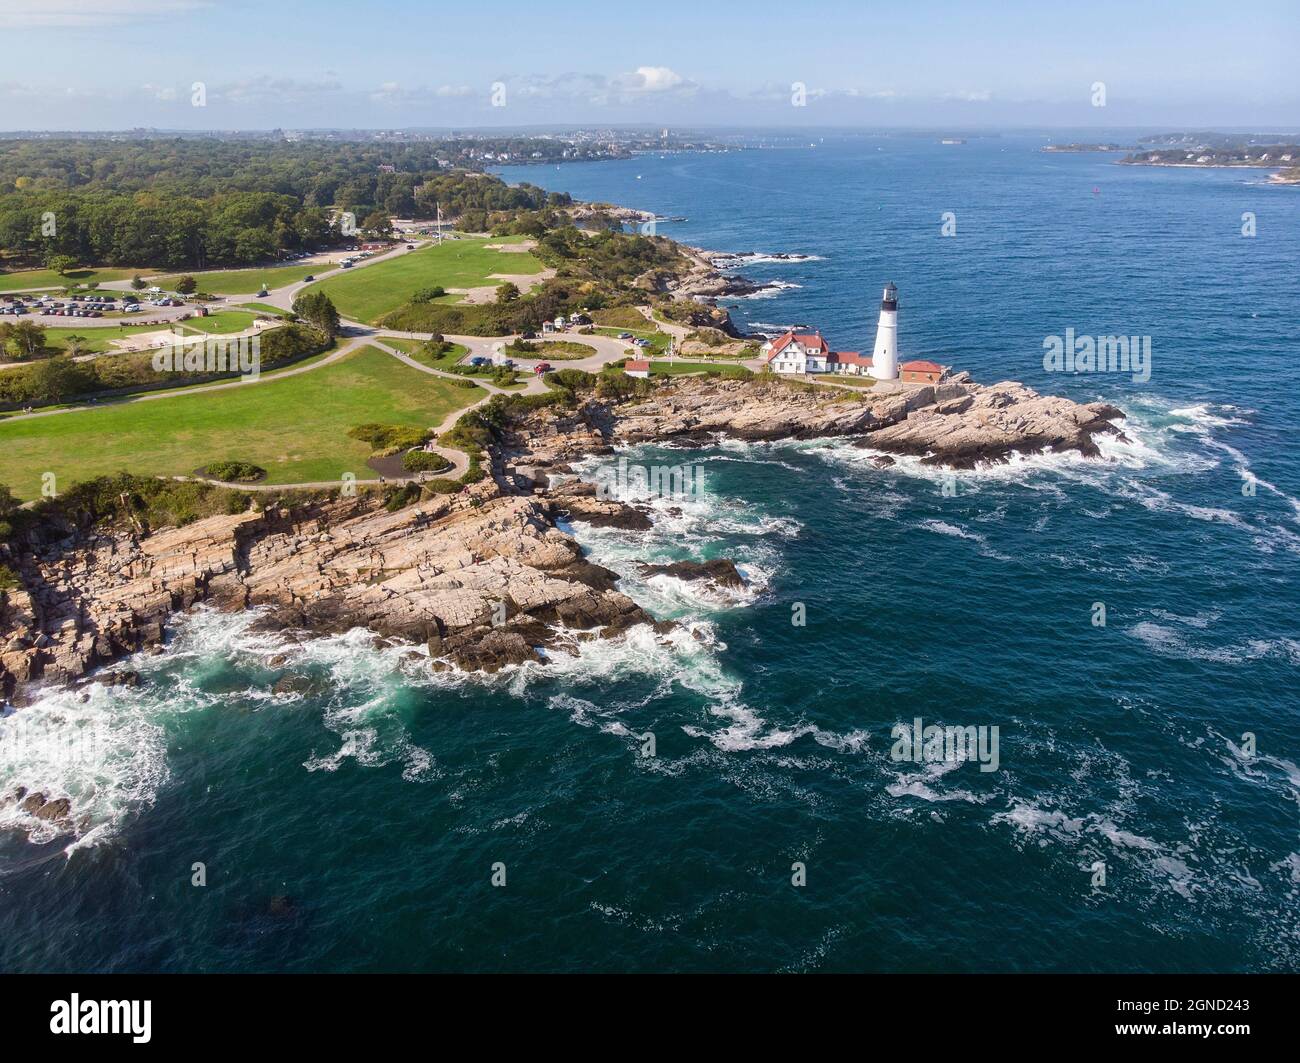 Aerial view of the Portand coast showing Fort Williams Park and the Portland Head Lighthouse. Stock Photo